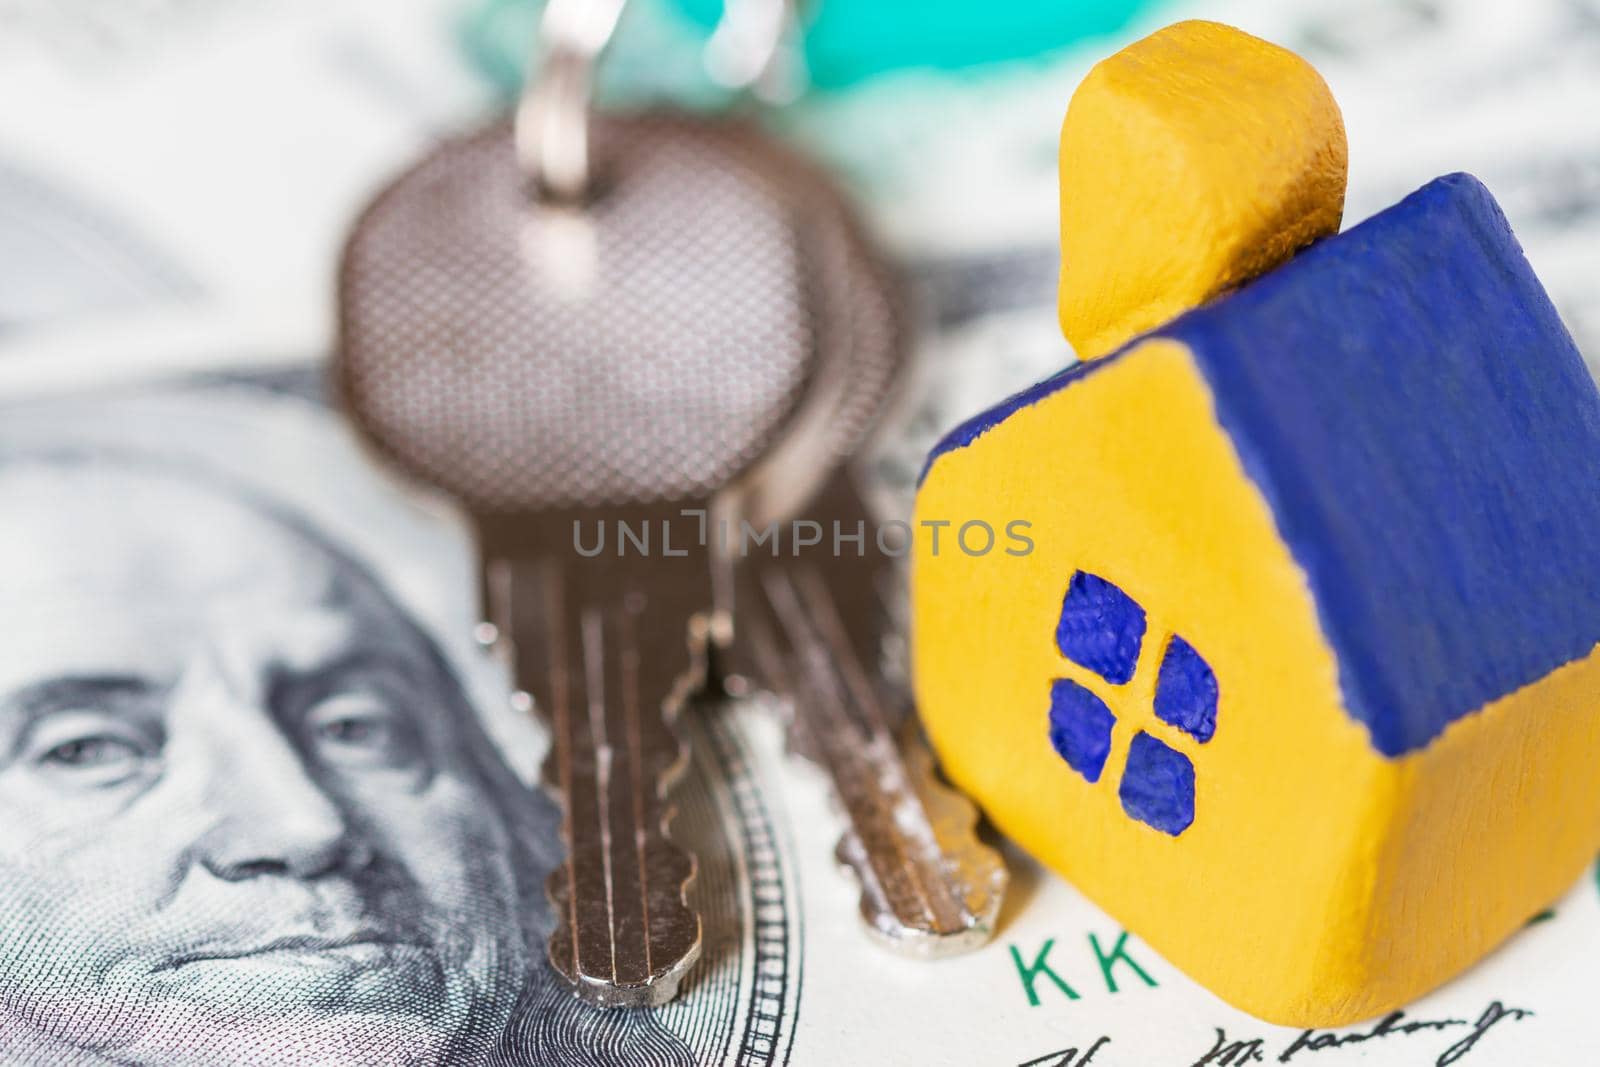 Miniature yellow toy house with keys on 100 (one hundred) euros bill. Selective focus. by marketlan